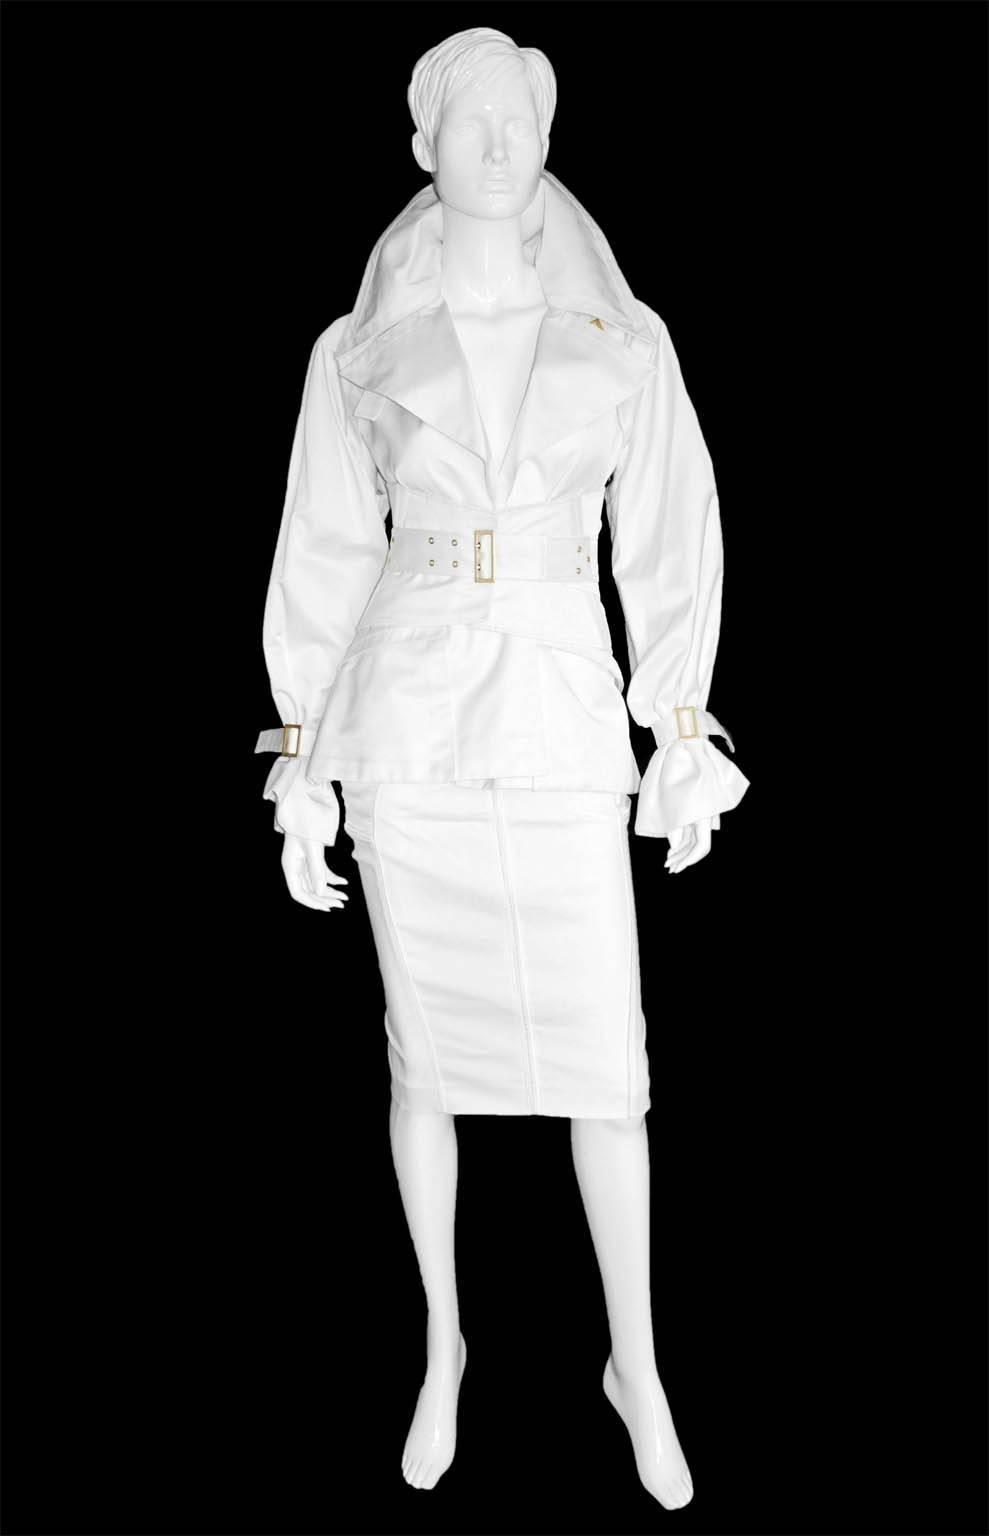 Considered by many to be his greatest collection of all, Tom Ford's fall winter 2003 collection for Gucci was simply awash with the most amazing corseted gowns, dresses, skirts & jackets... & this heavenly white jacket with matching corset belt &